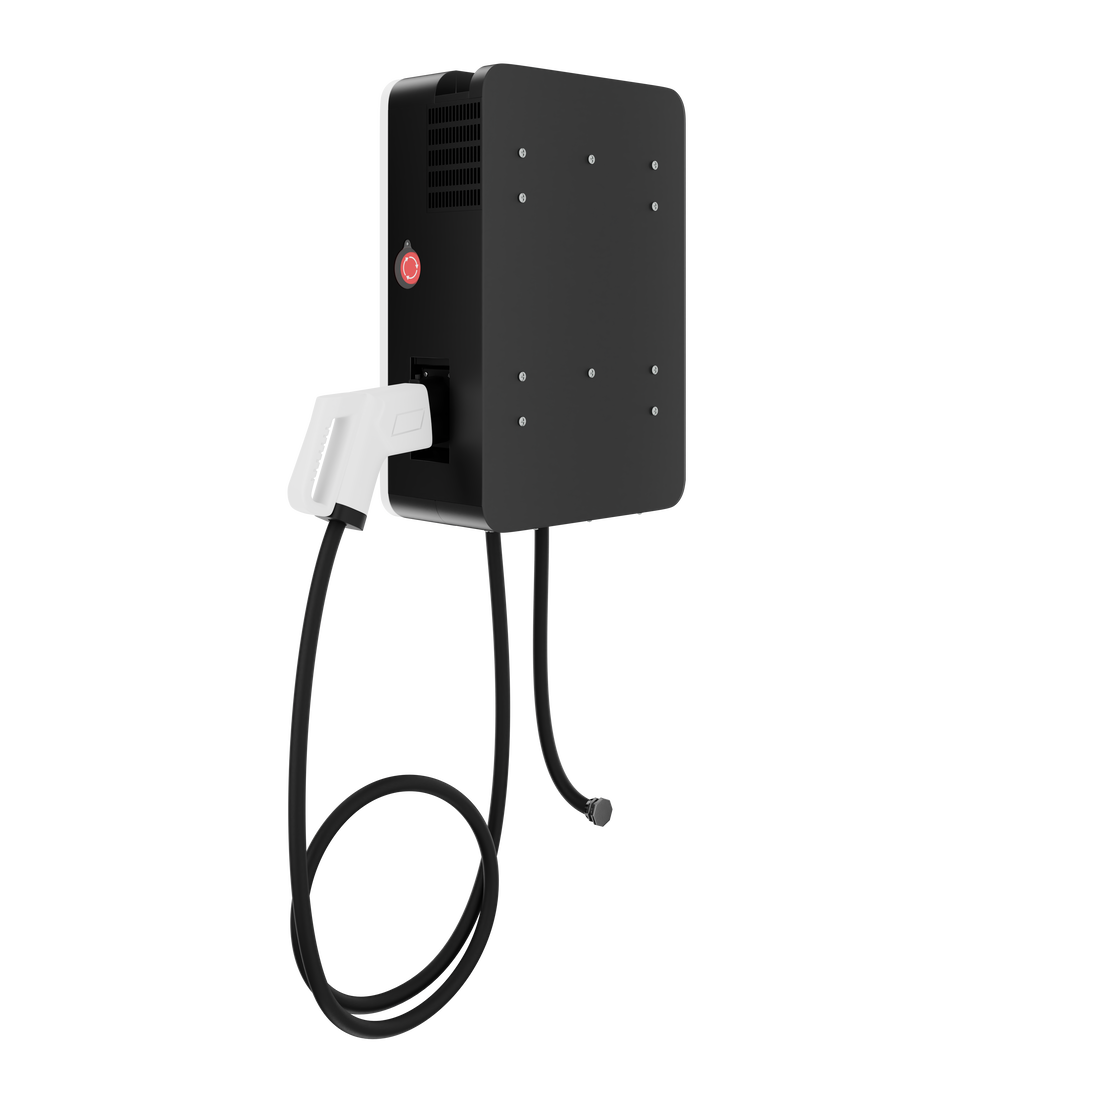 Hydra Dion 20kW CCS2 DC Wallbox Charge Point